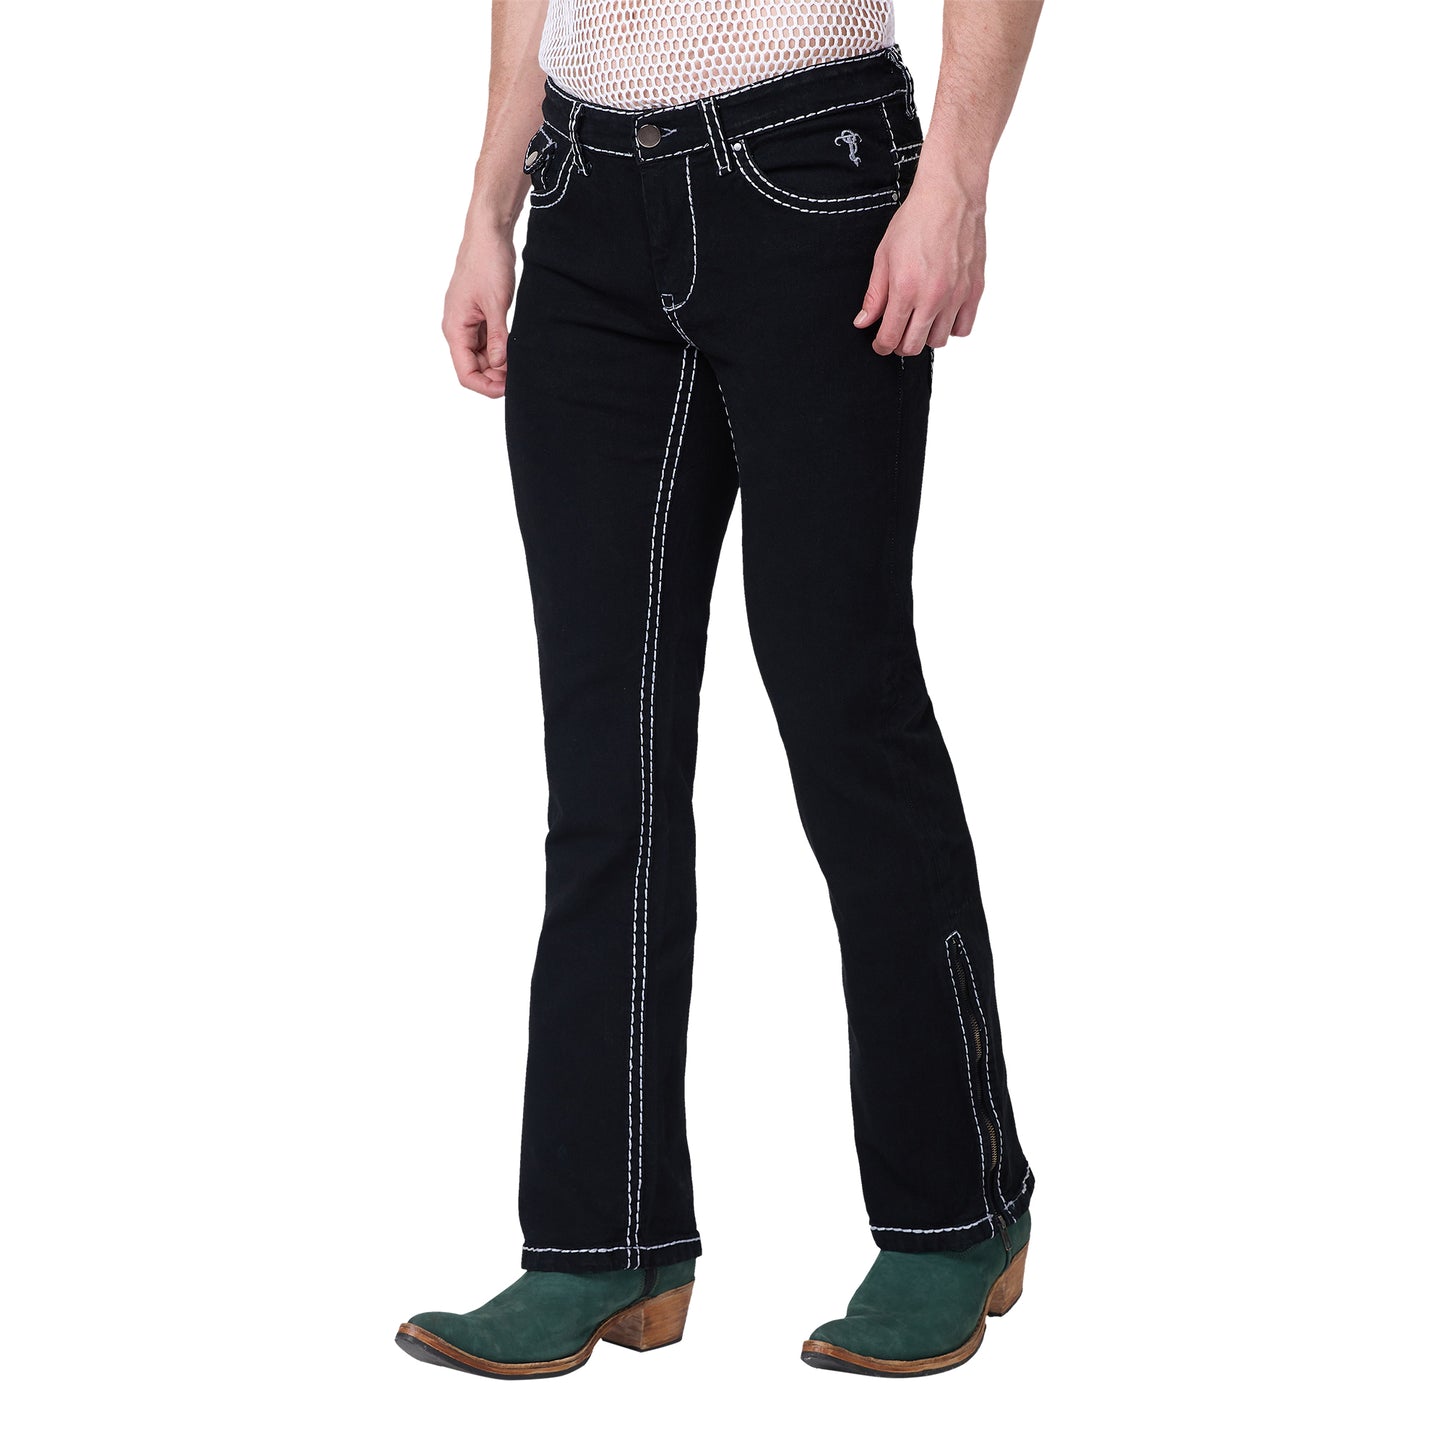 Mens Black Bootcut Slim Fit Jeans Strechable With White Saddle Stitch